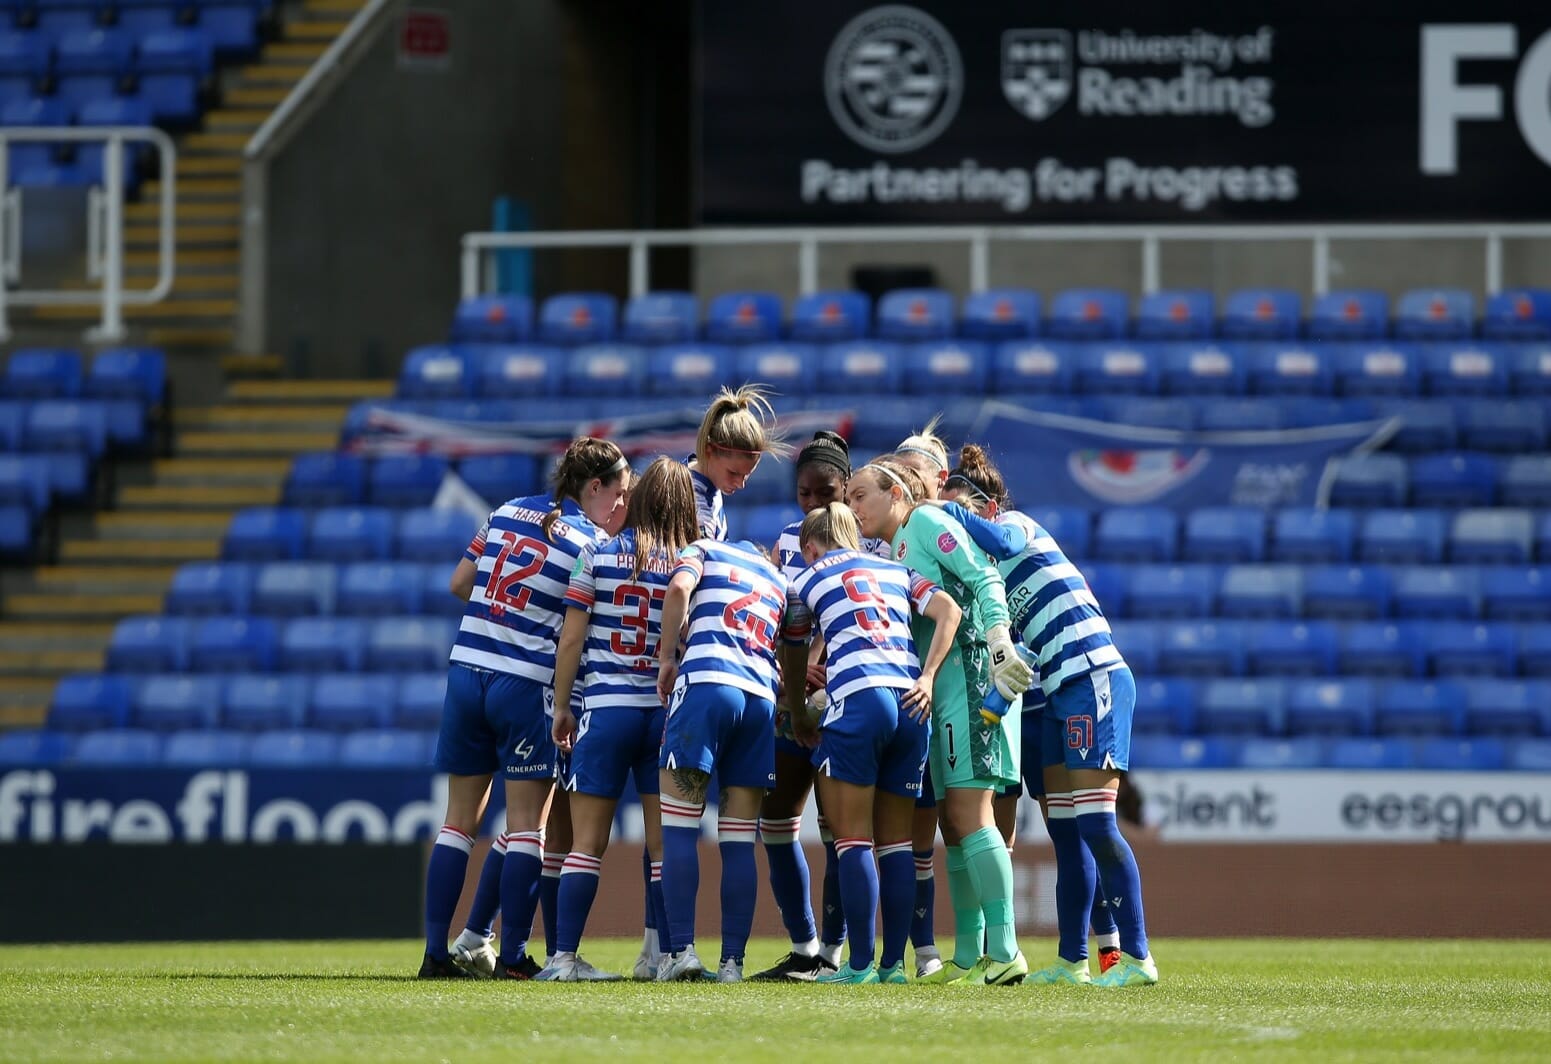 PLAYER RATINGS: Vanhaevermaet’s brace not enough to prevent Reading Women falling to Everton